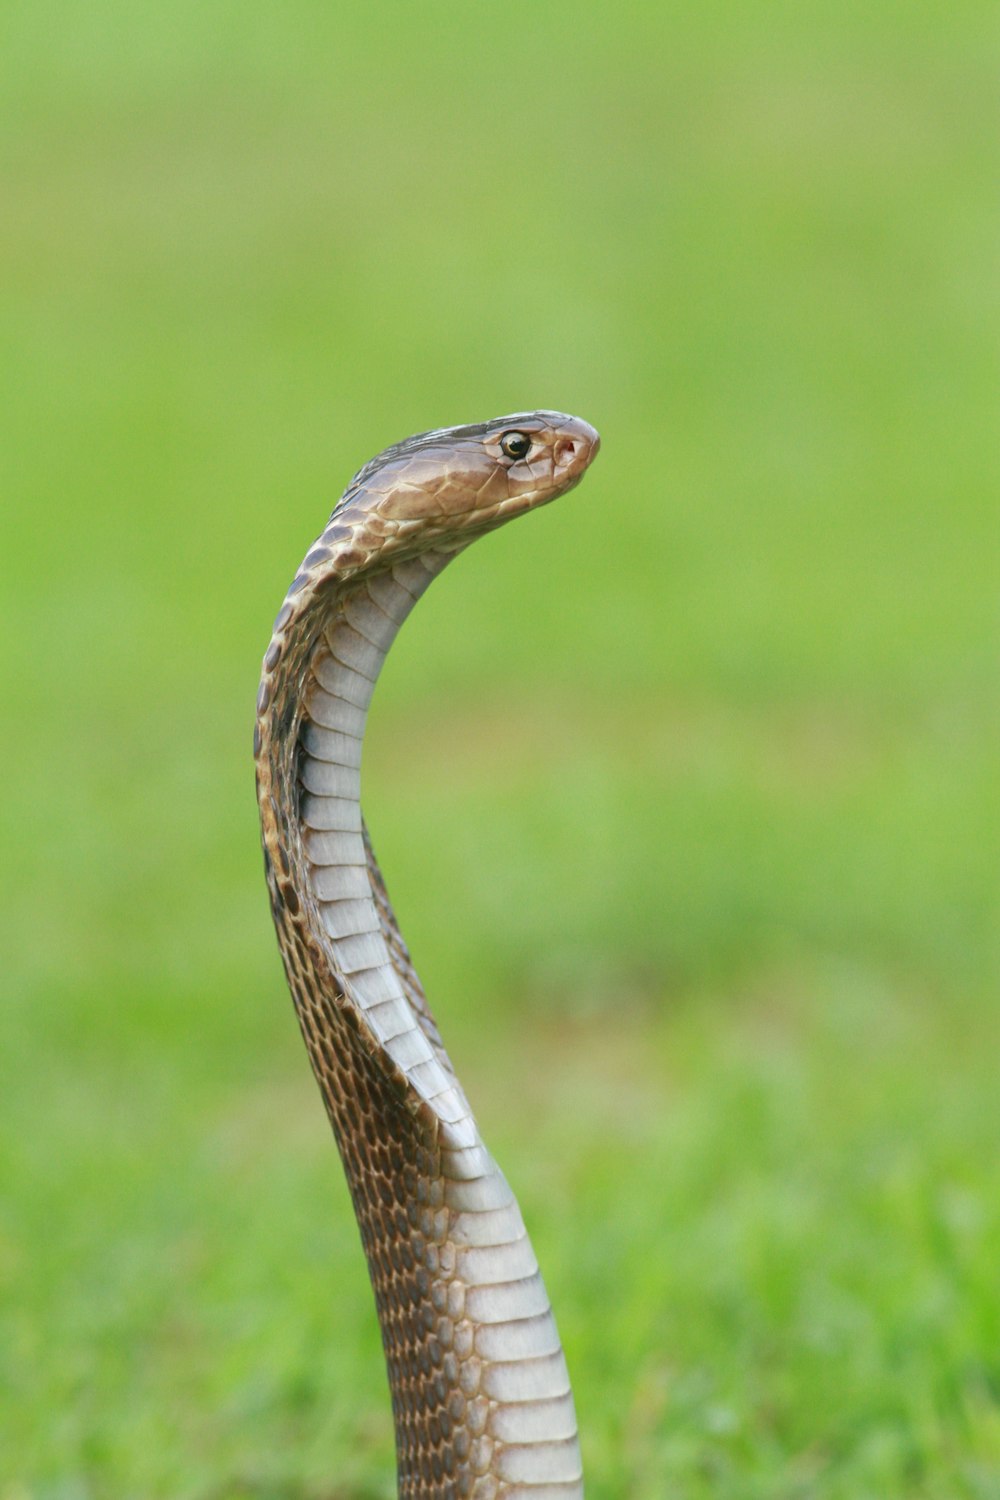 close-up photo of brown and gray snake